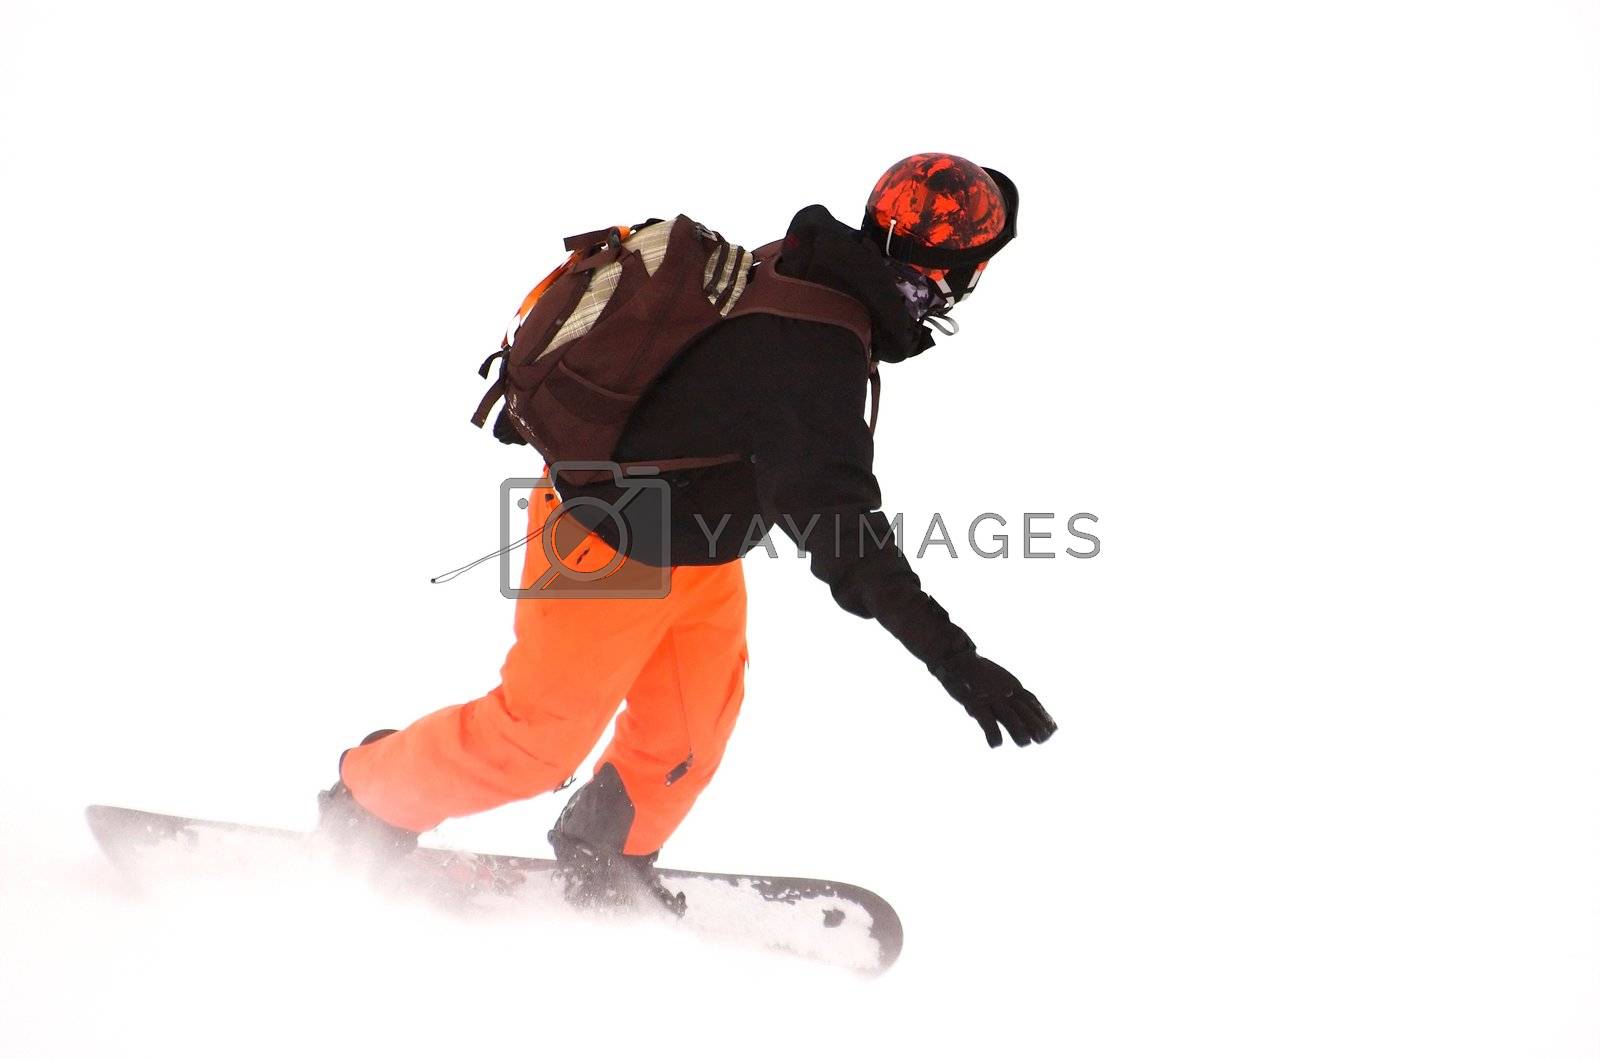 Royalty free image of snowboarder by twieja